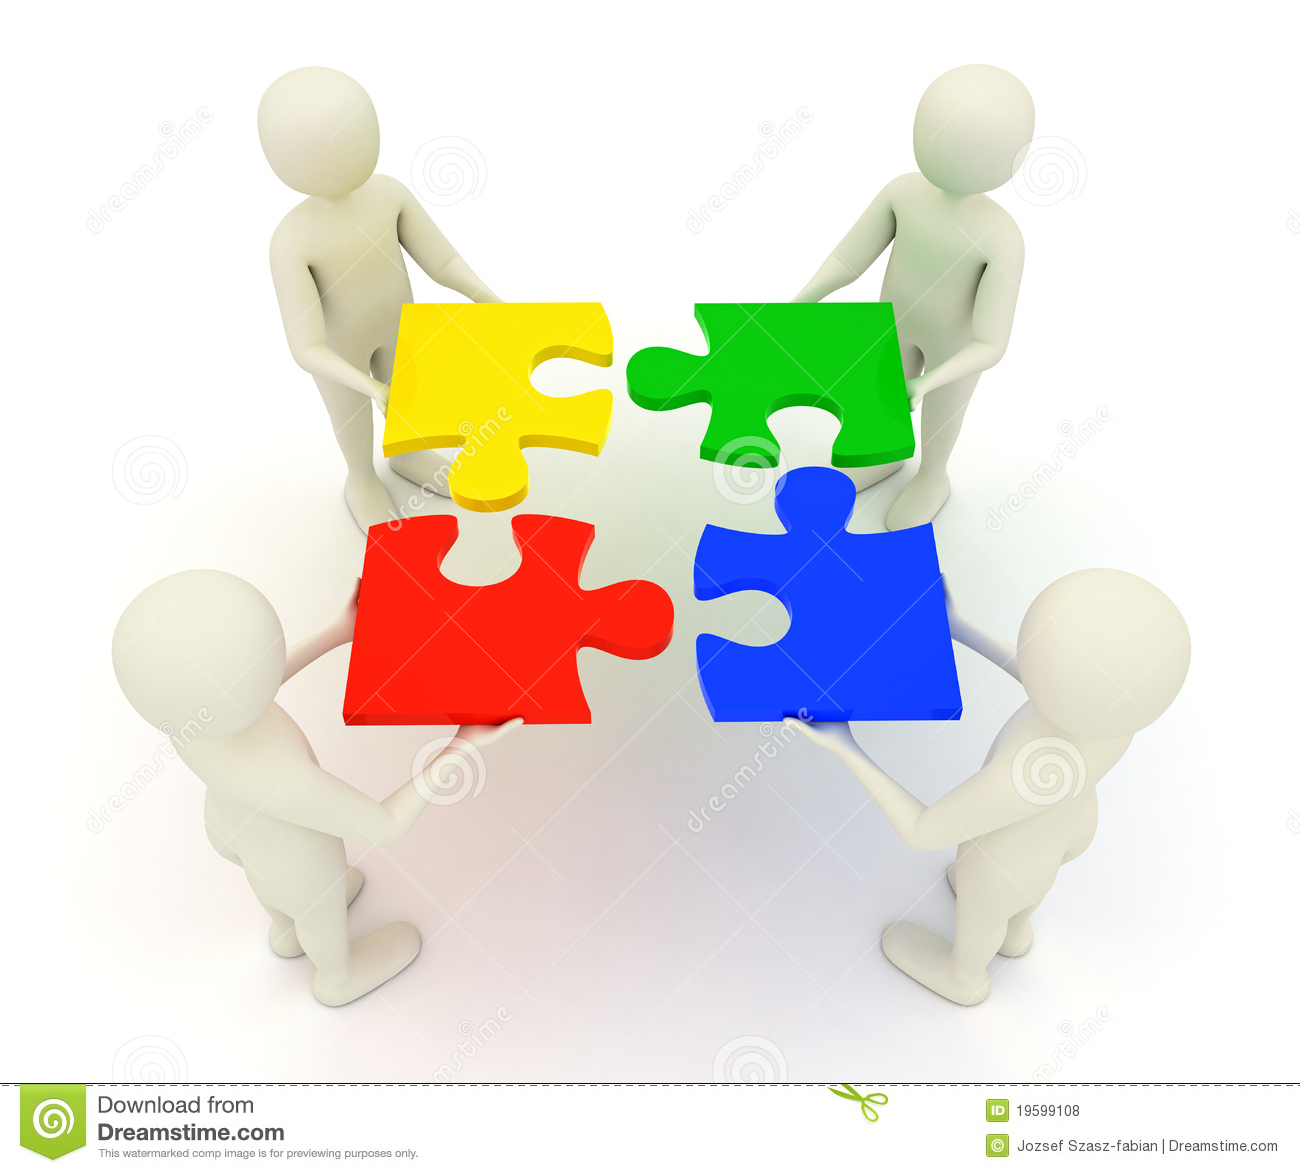 Royalty Free Stock Photos  3d Men Holding Assembled Jigsaw Puzzle